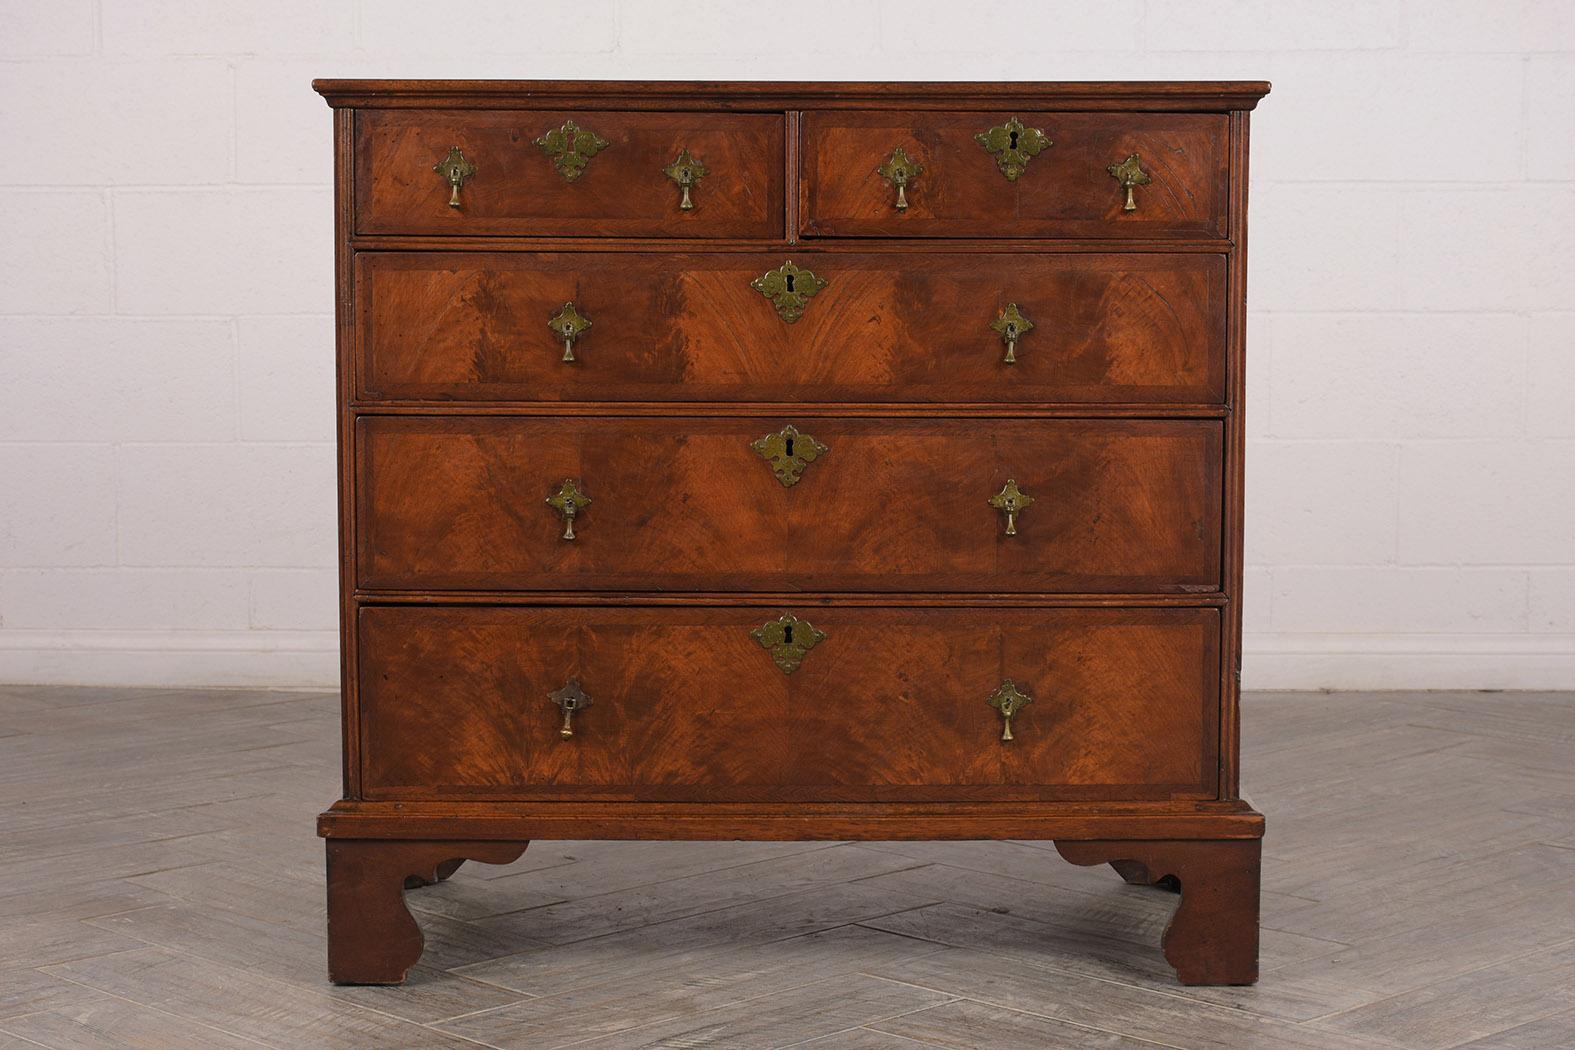 This period George III Mahogany chest feature a wooden top, five drawers, and original locks. It has two small top drawers, three large pull drawers, and each has original brass drop handles and large key plates. All the drawers open and close with